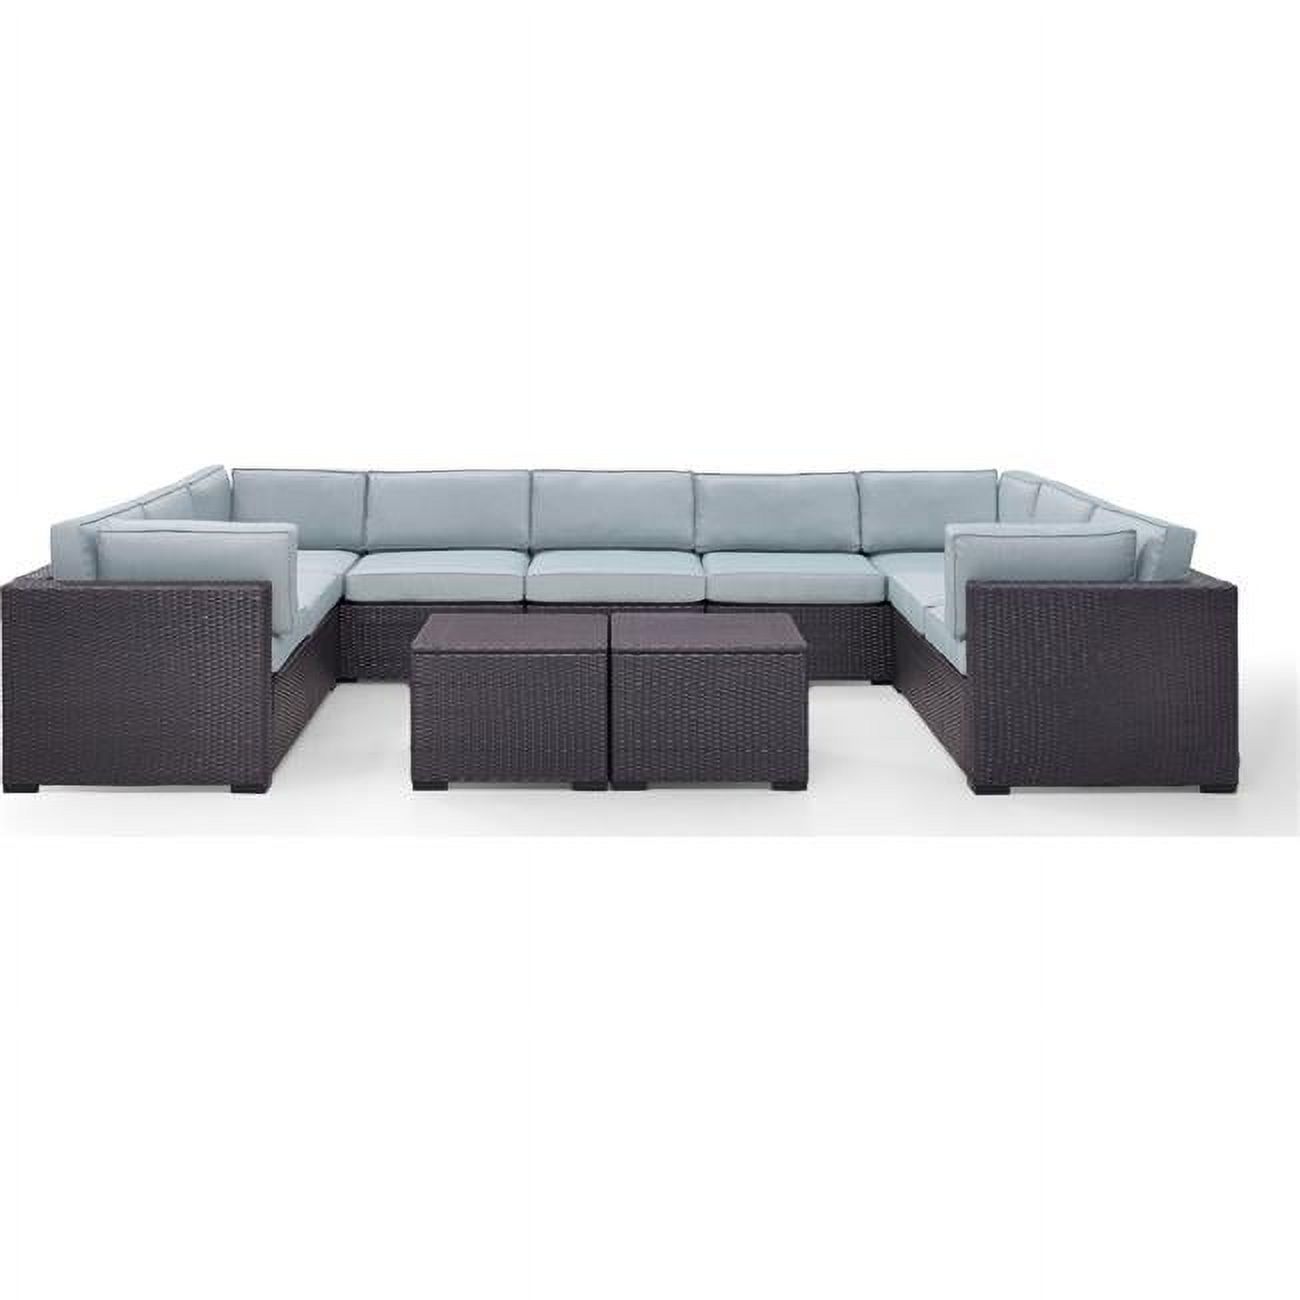 Biscayne 9 Person Outdoor Wicker Seating Set, Mist - Four Loveseats, One Armless Chair, Two Coffee Tables - image 1 of 1